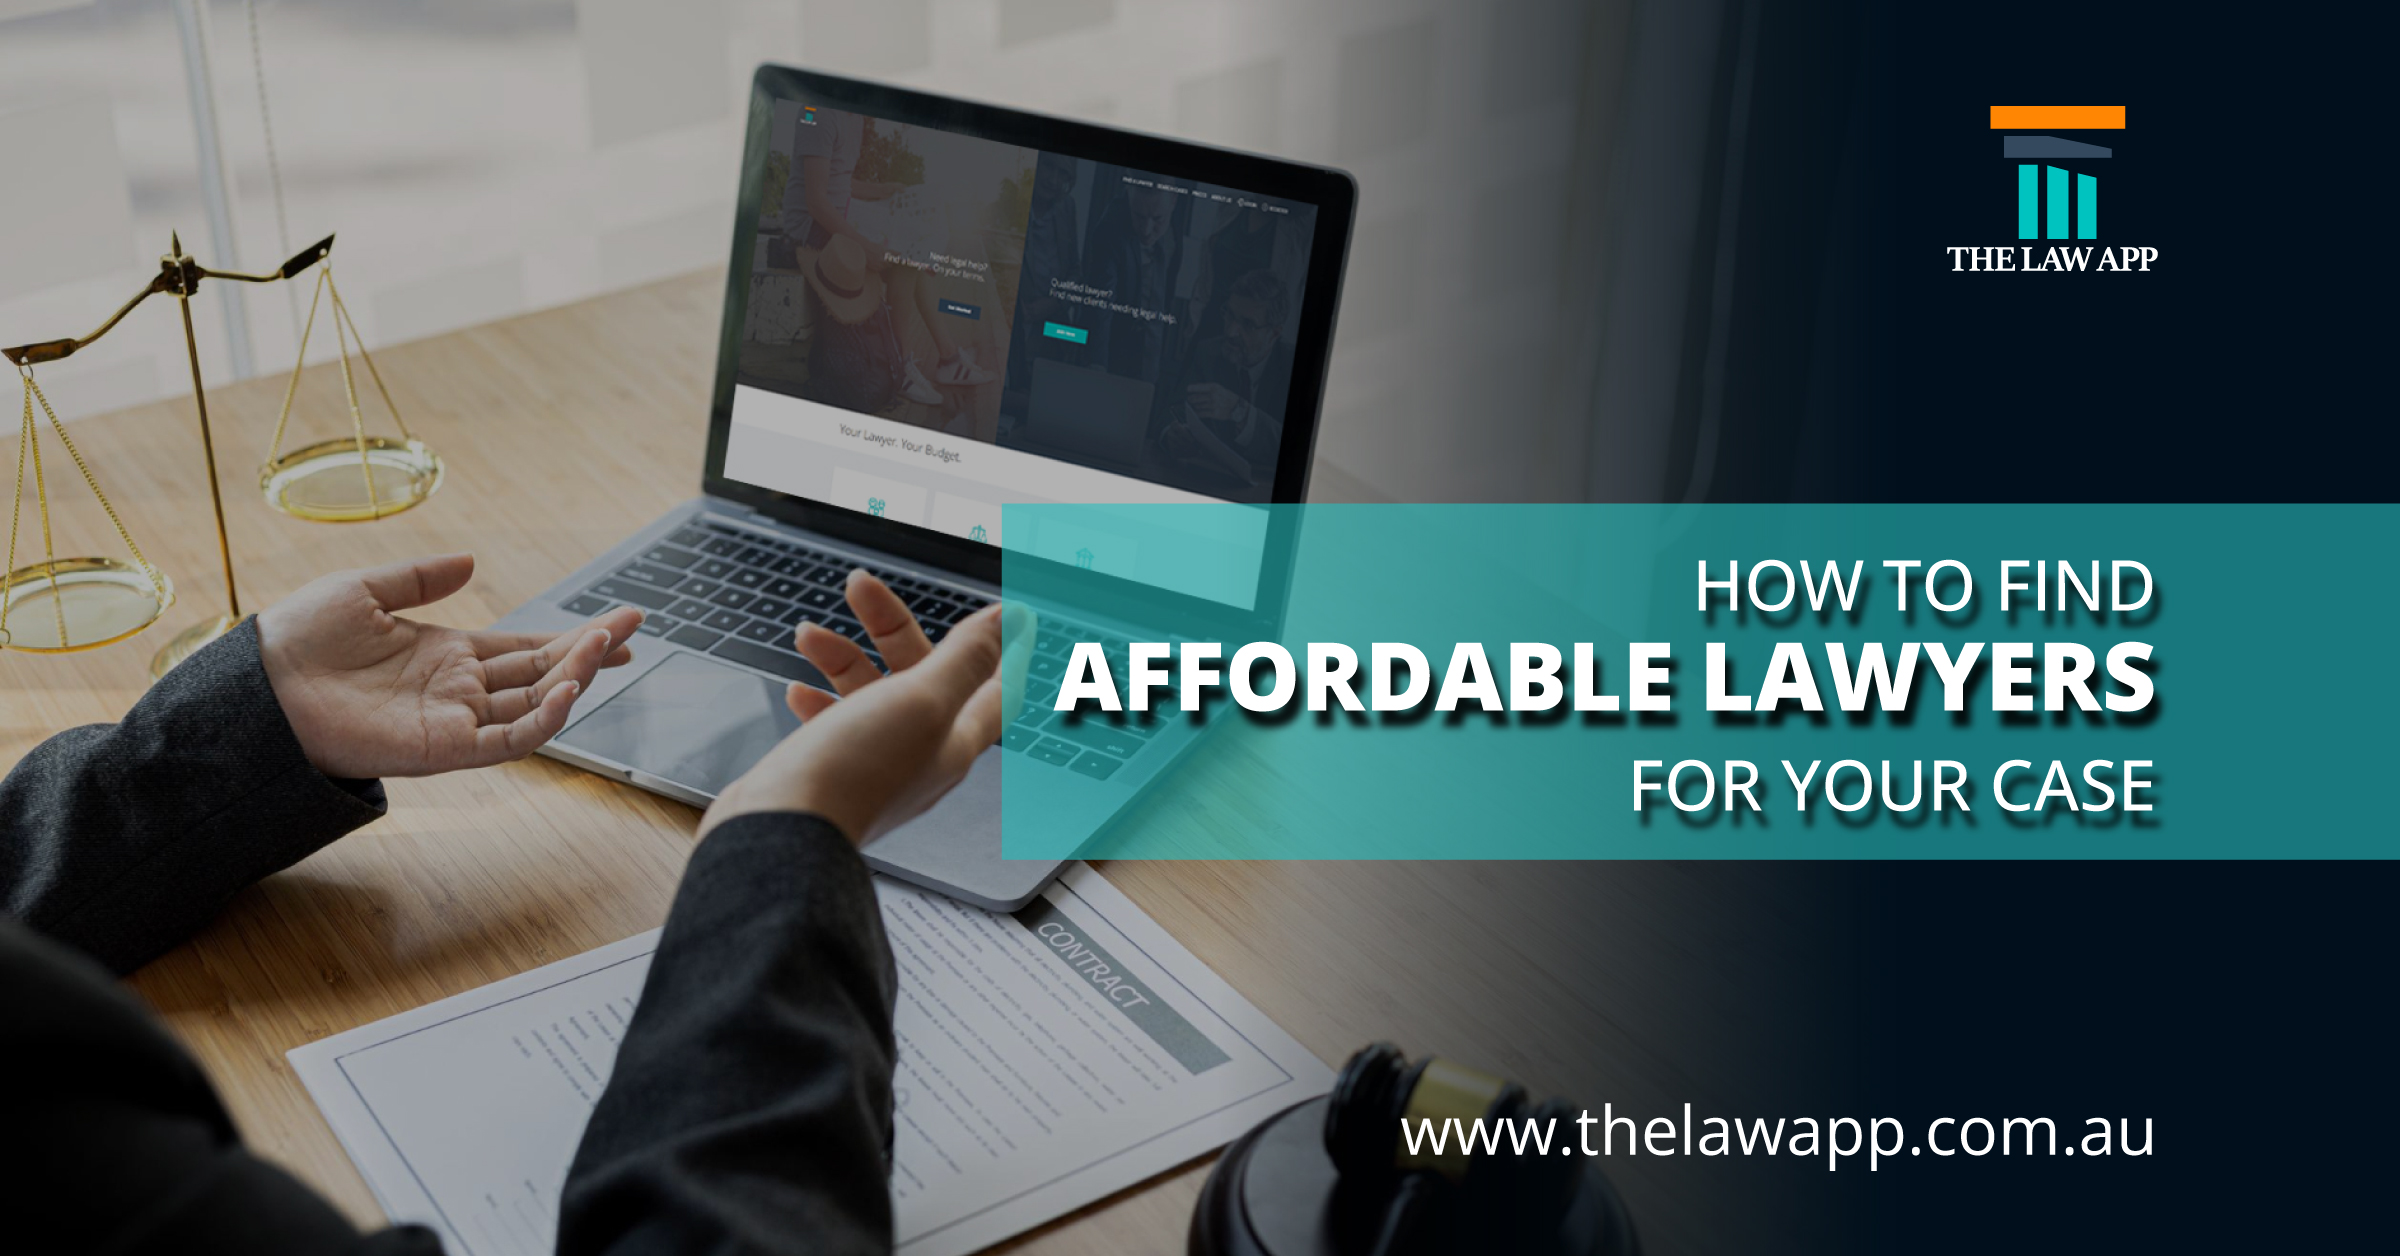 How to Find Affordable Lawyers for Your Case